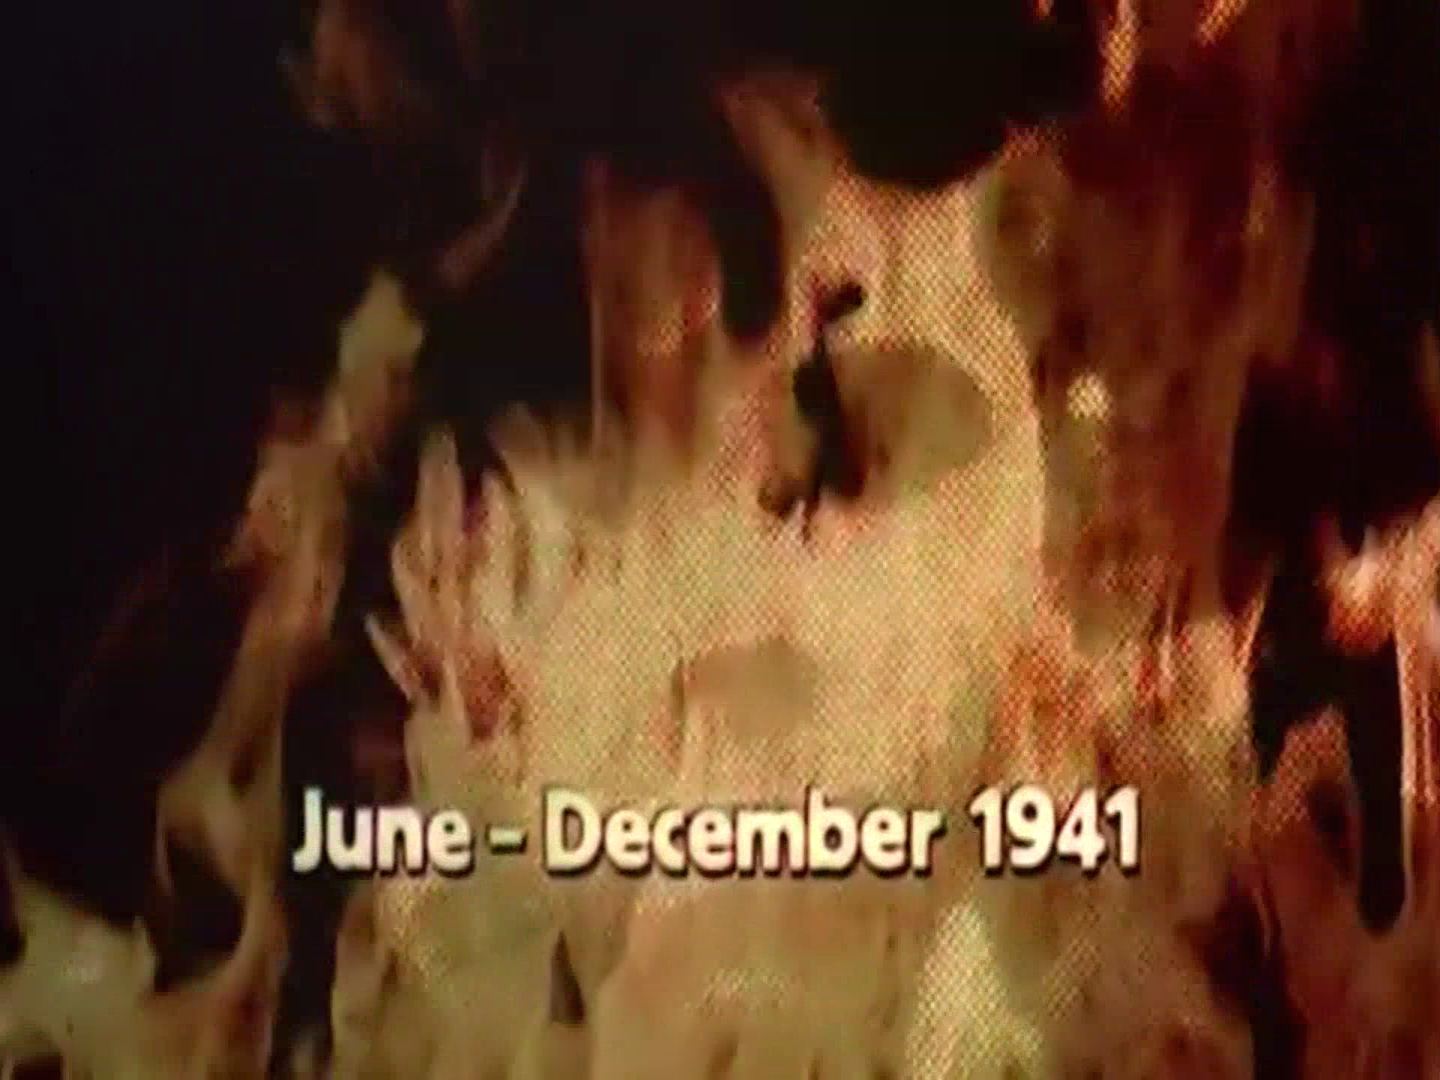 Main title from the 1973 ‘Barbarossa’ episode of The World at War (1973-74) (2). June-December 1941